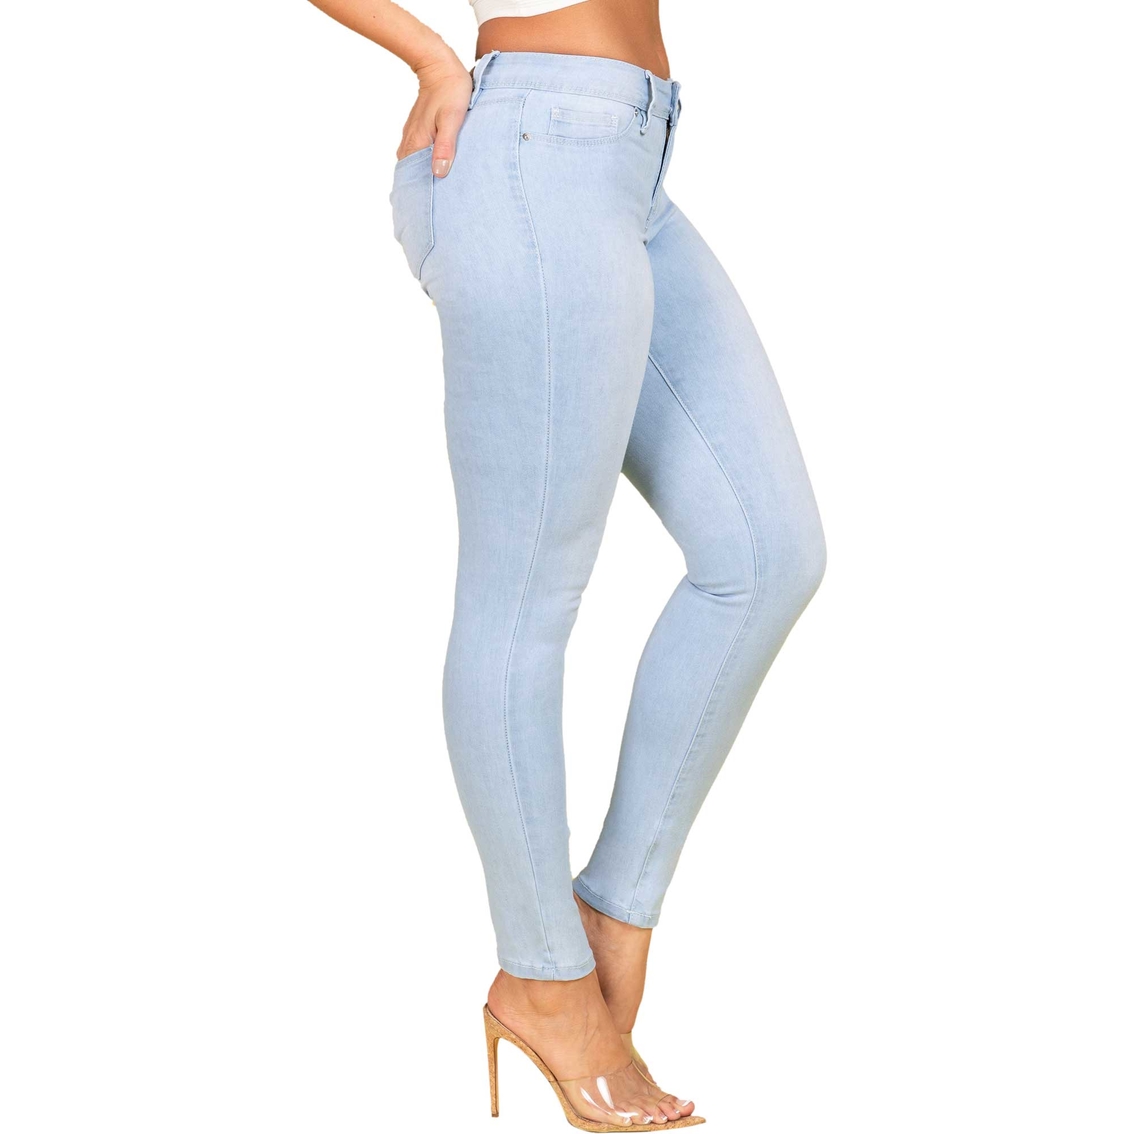 YMI Juniors 9IN Mid Rise Skinny Jeans - Image 3 of 4